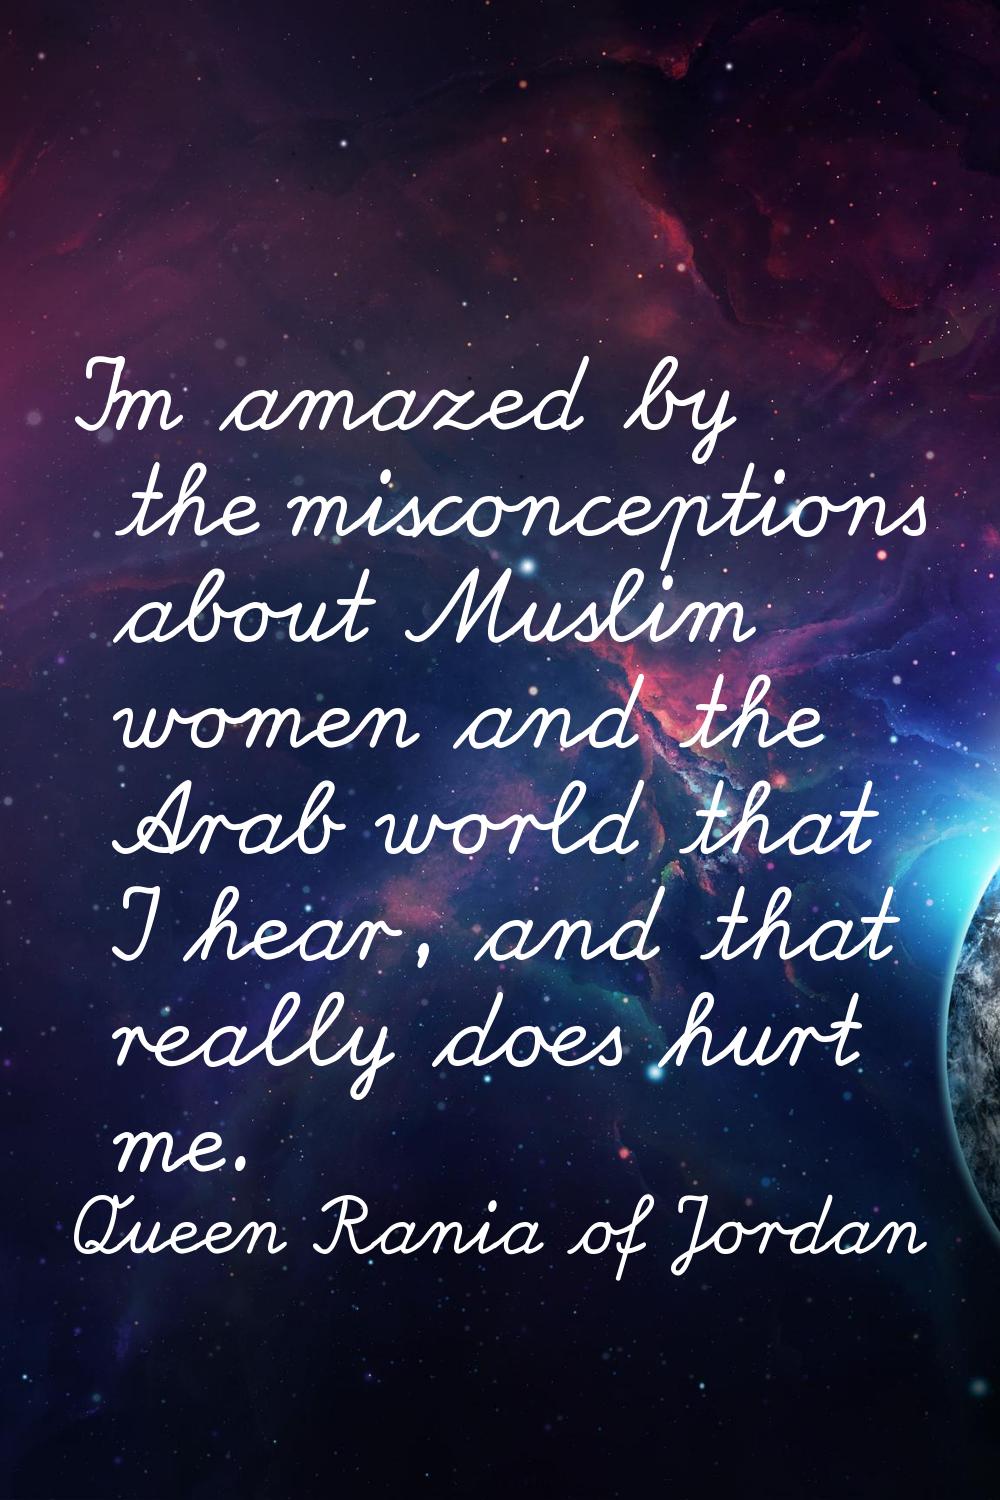 I'm amazed by the misconceptions about Muslim women and the Arab world that I hear, and that really